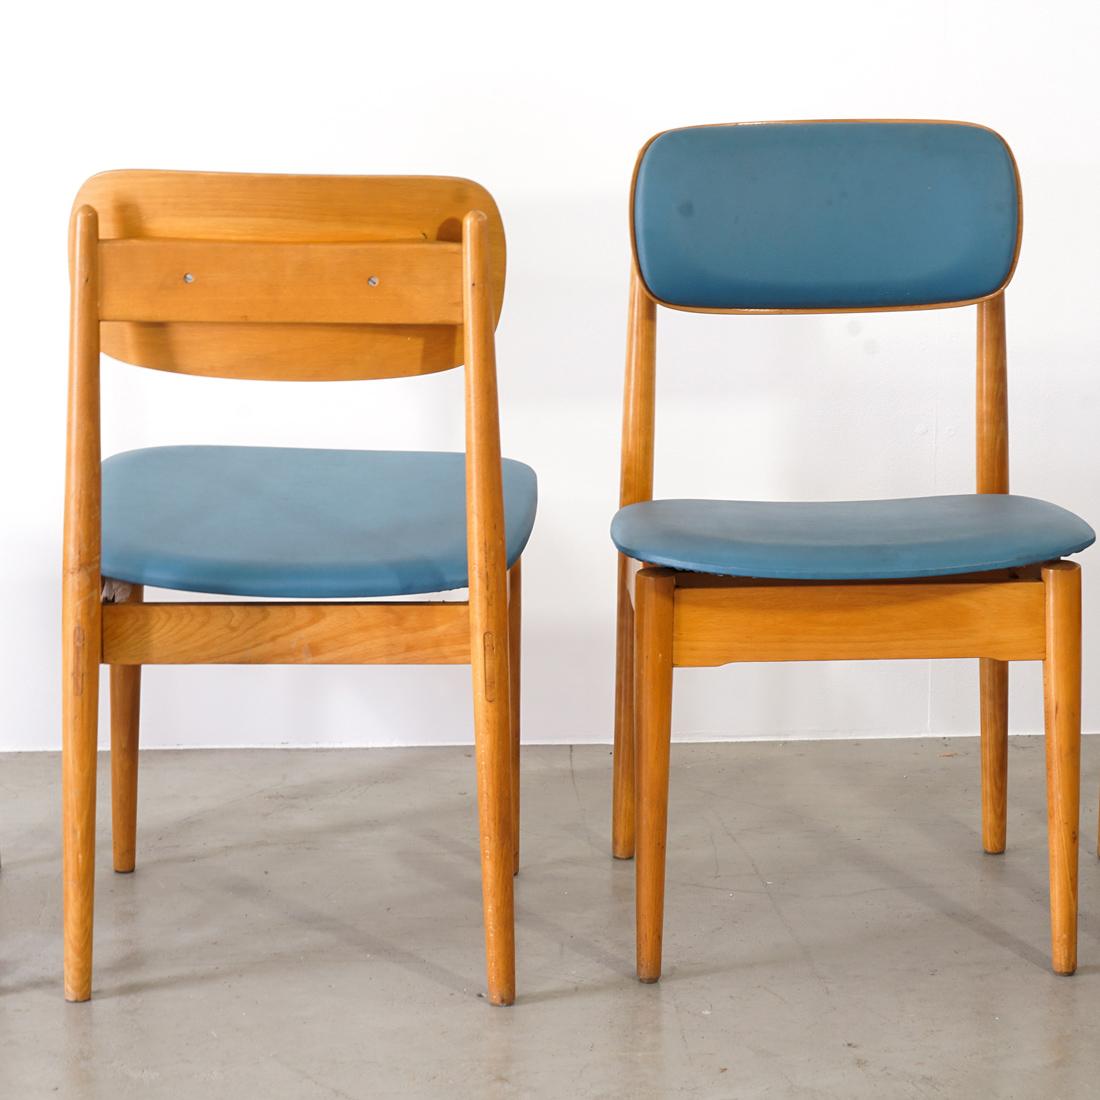 Midcentury Chairs, Manufactured 1957 in Germany In Good Condition For Sale In Waedenswil, CH